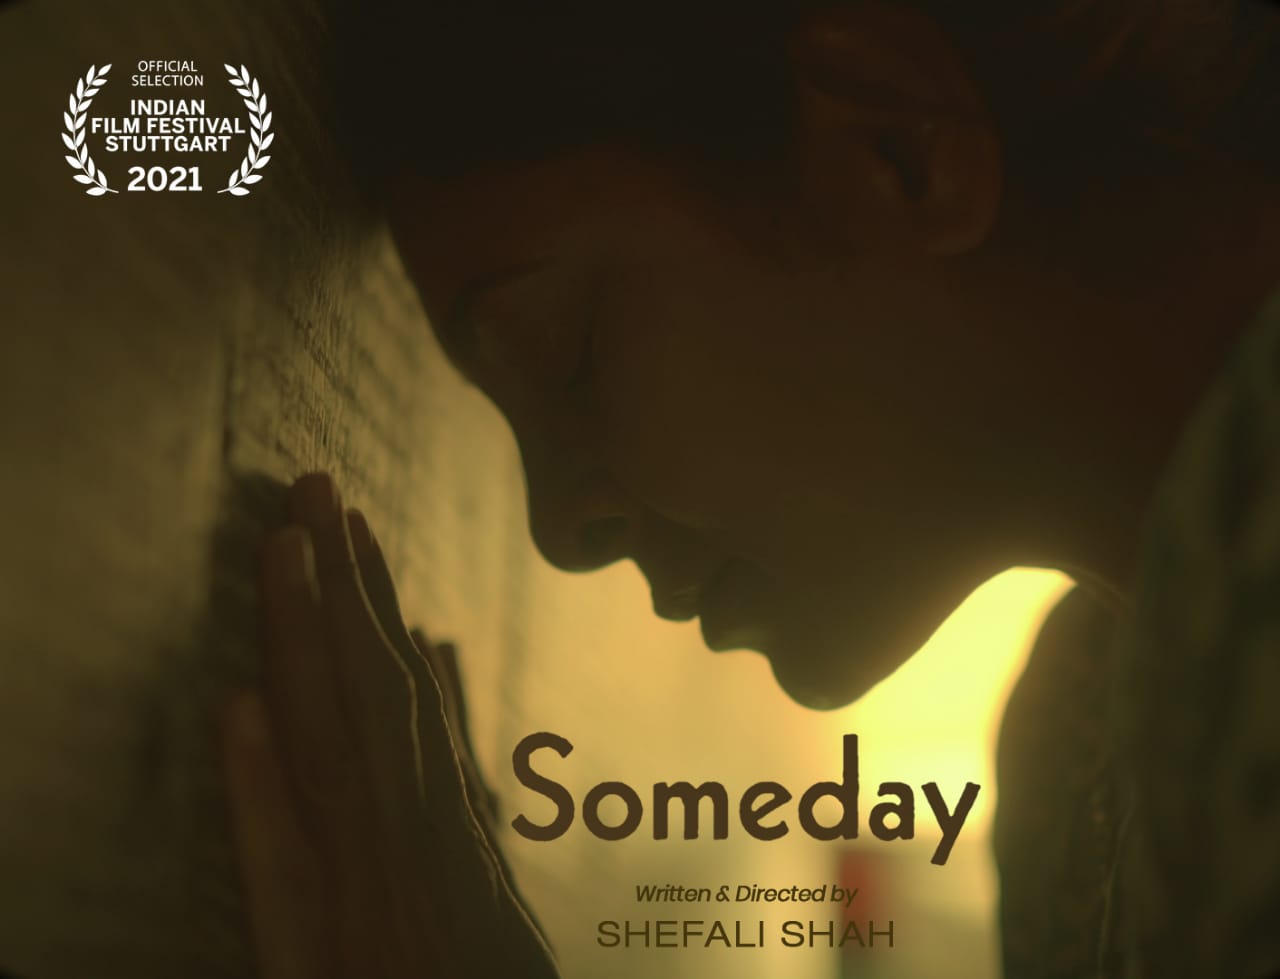 ‘Someday’ will be screened at the Indian Film Festival in Stuttgart